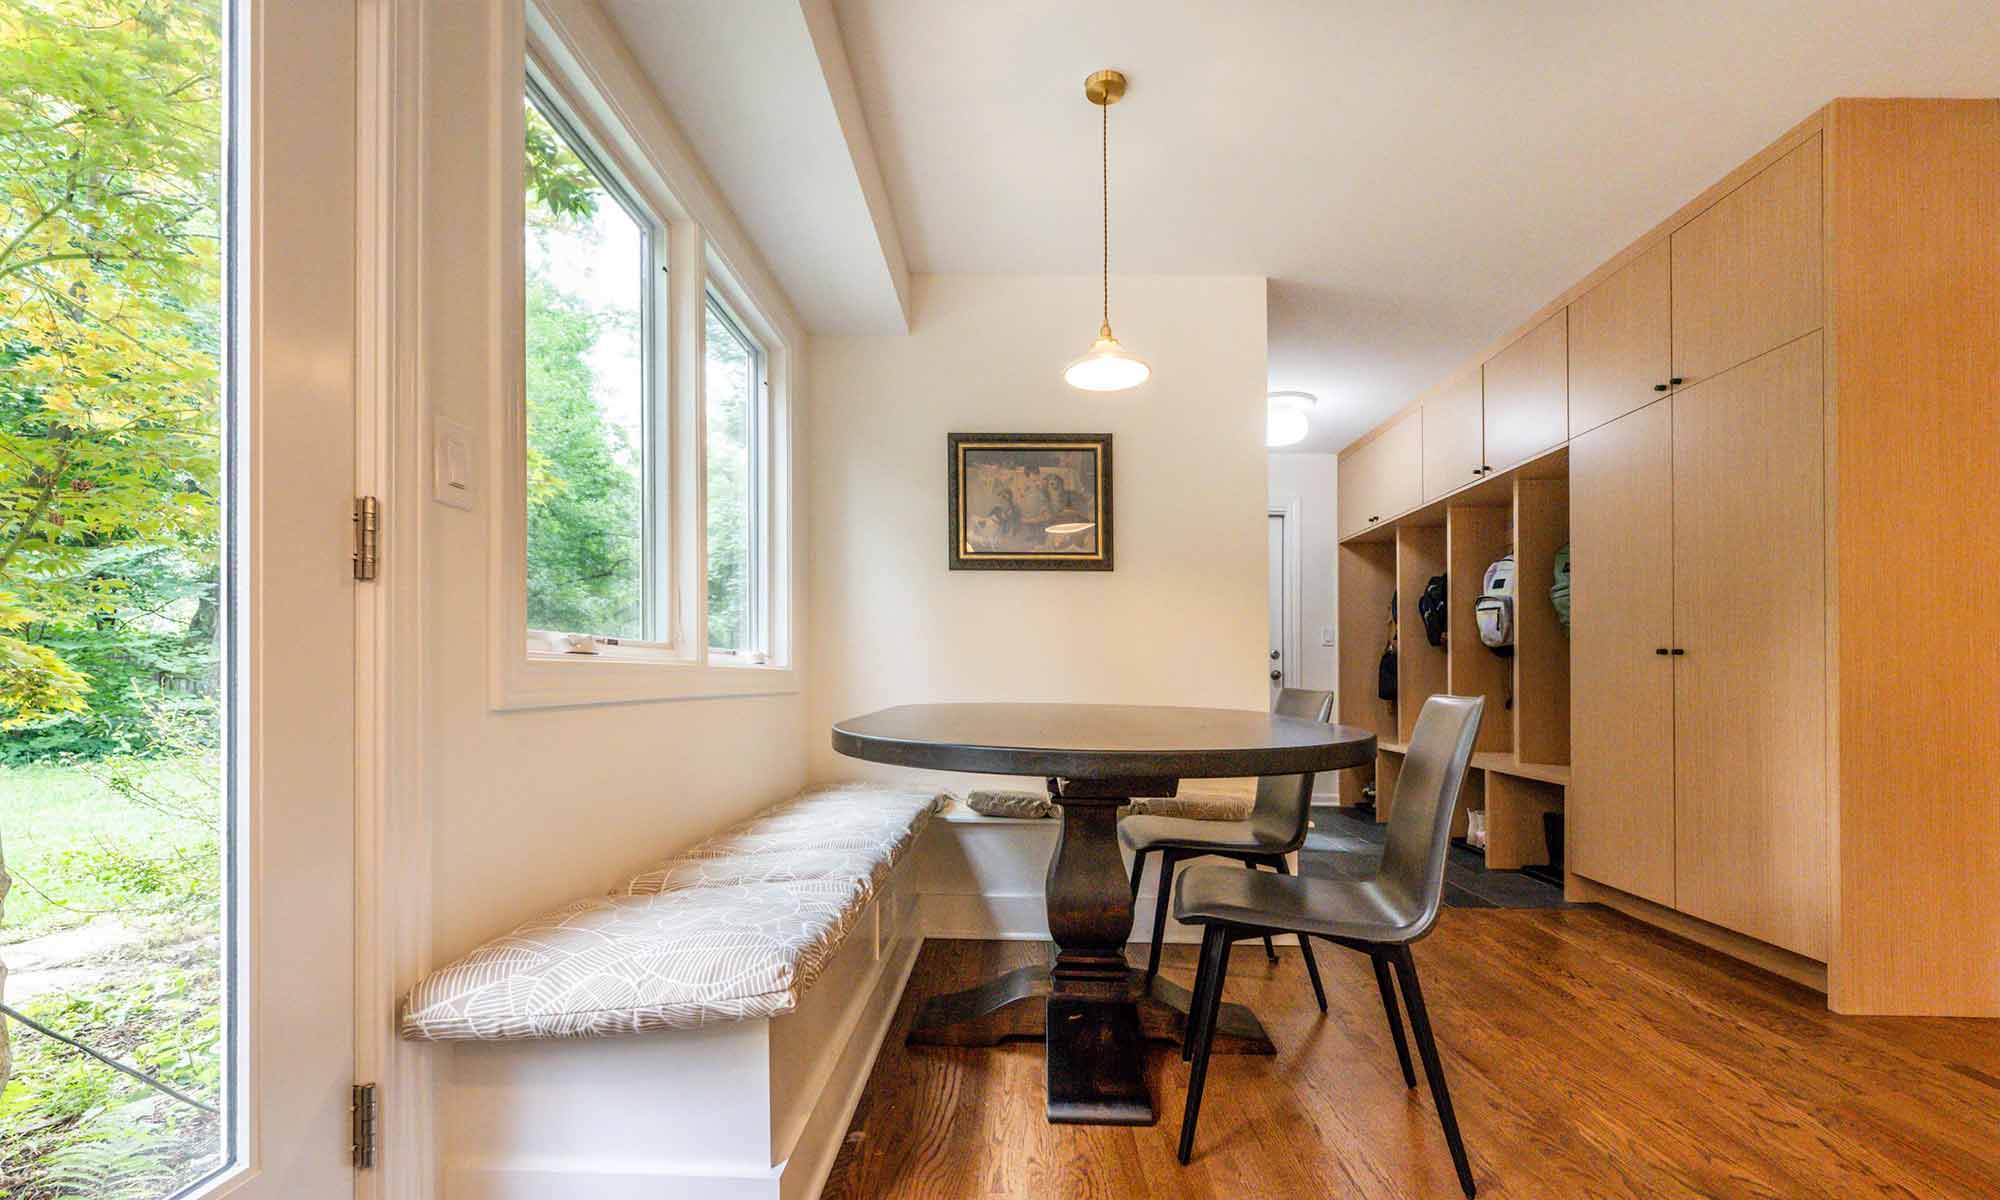 Built-in banquette seating under window in luxury kitchen remodel with view towards mudroom built-in cabinetry